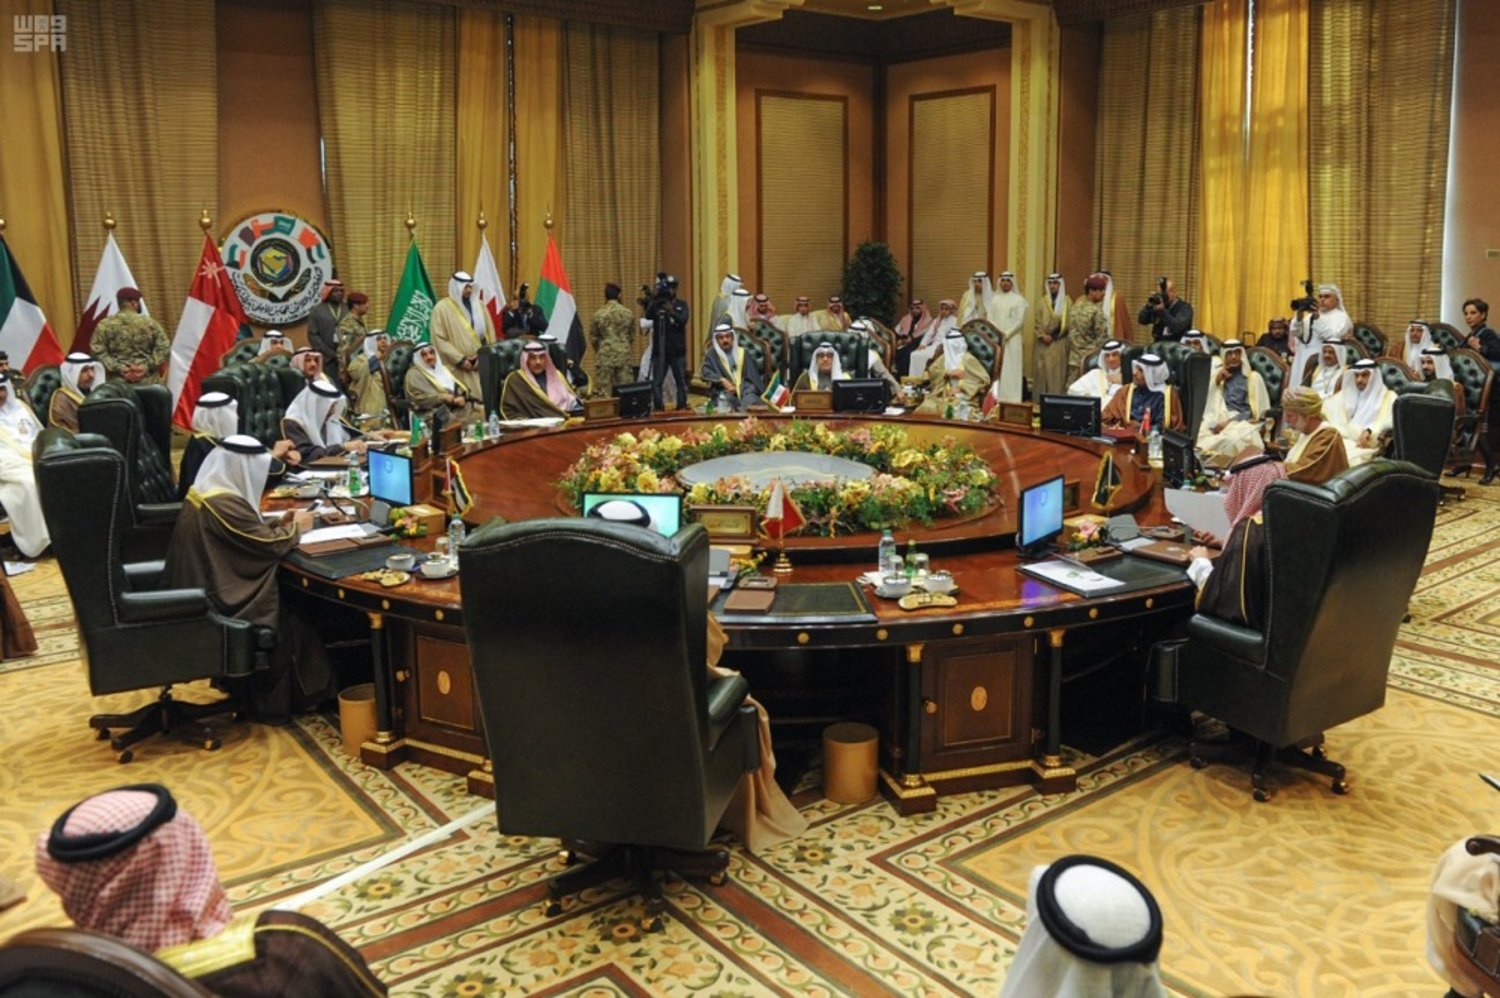 A general view of the meeting of the Gulf Cooperation Council (GCC) of foreign ministers at the Bayan palace in Kuwait City on December 4, 2017. (SPA)